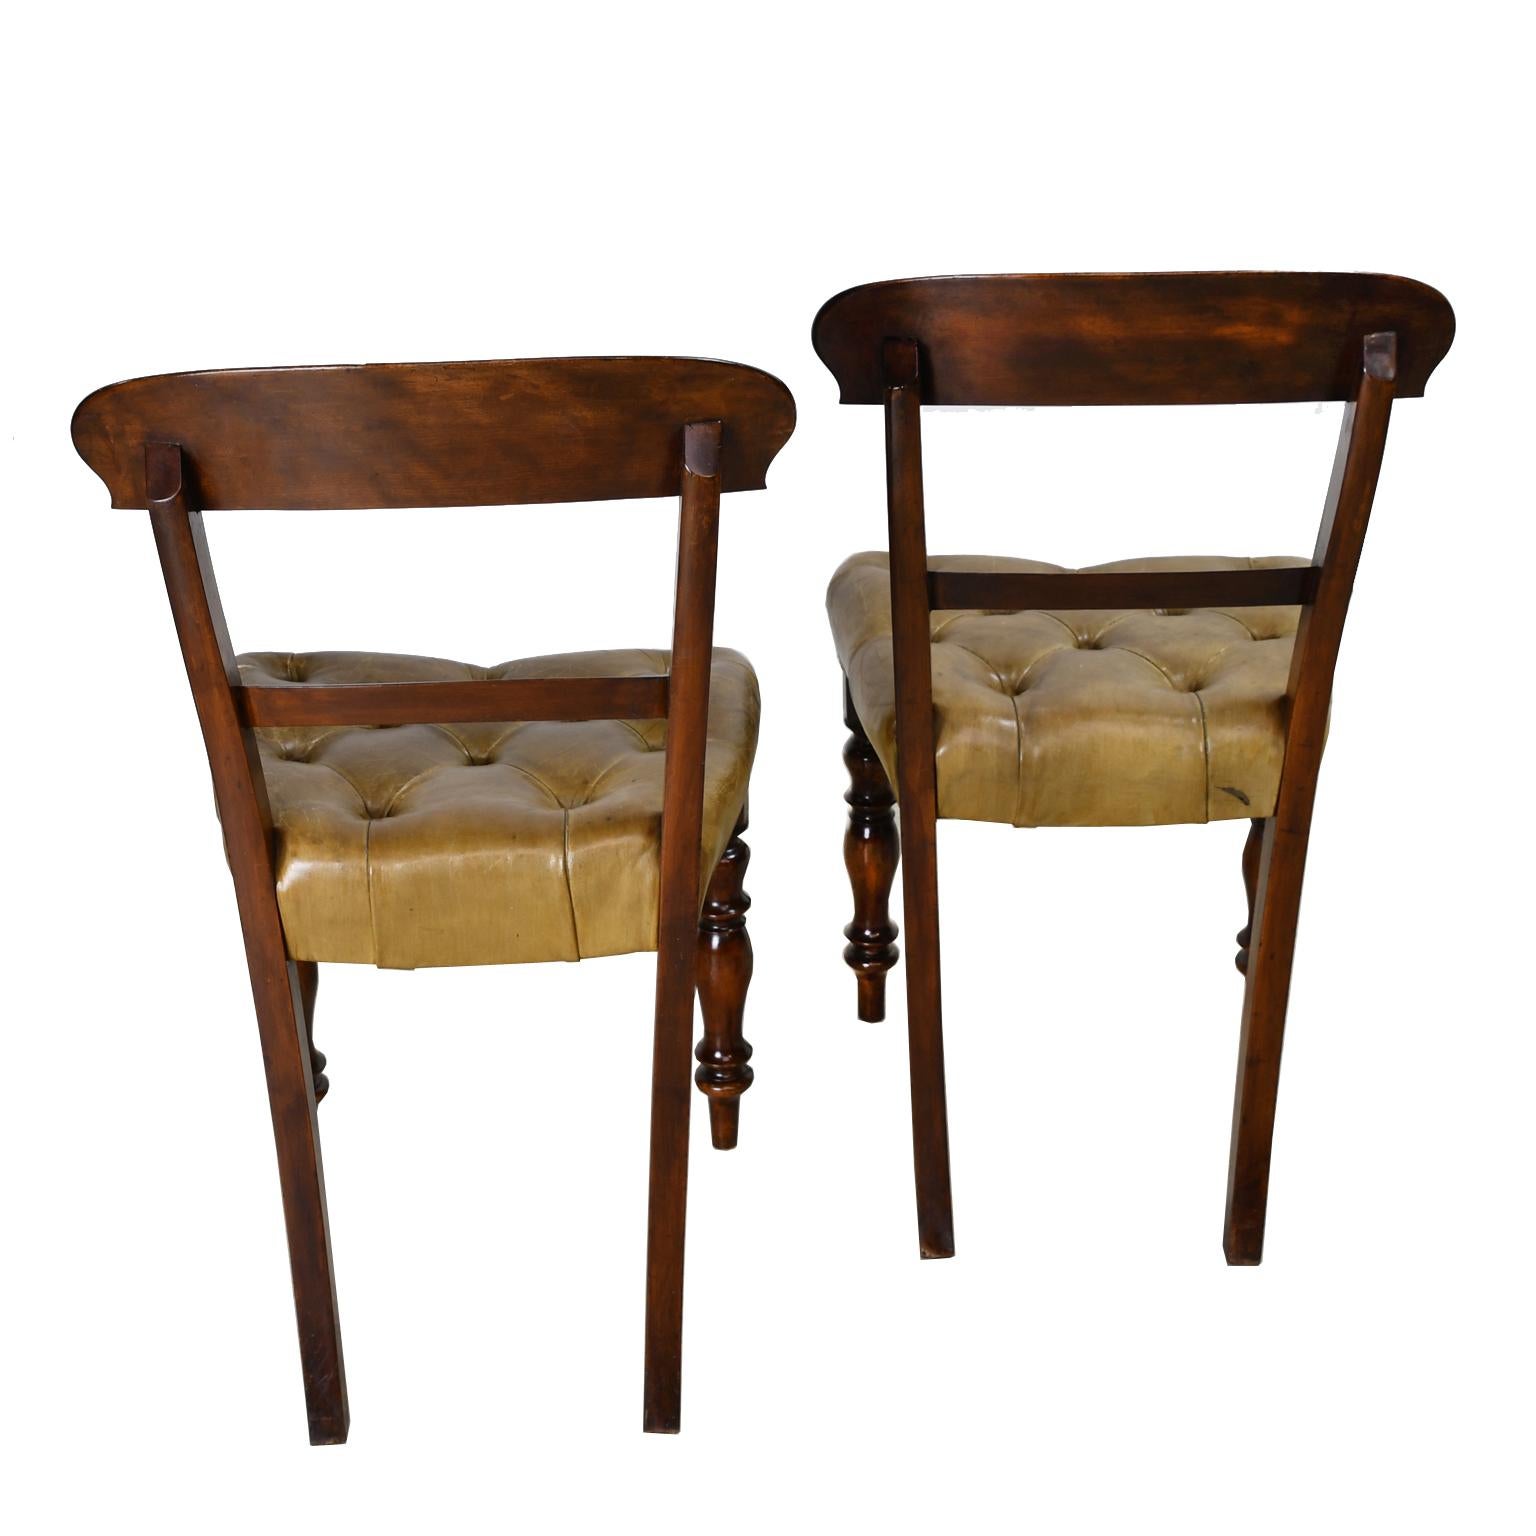 Pair of Early Victorian Mahogany Chairs with Leather Upholstery, England 2